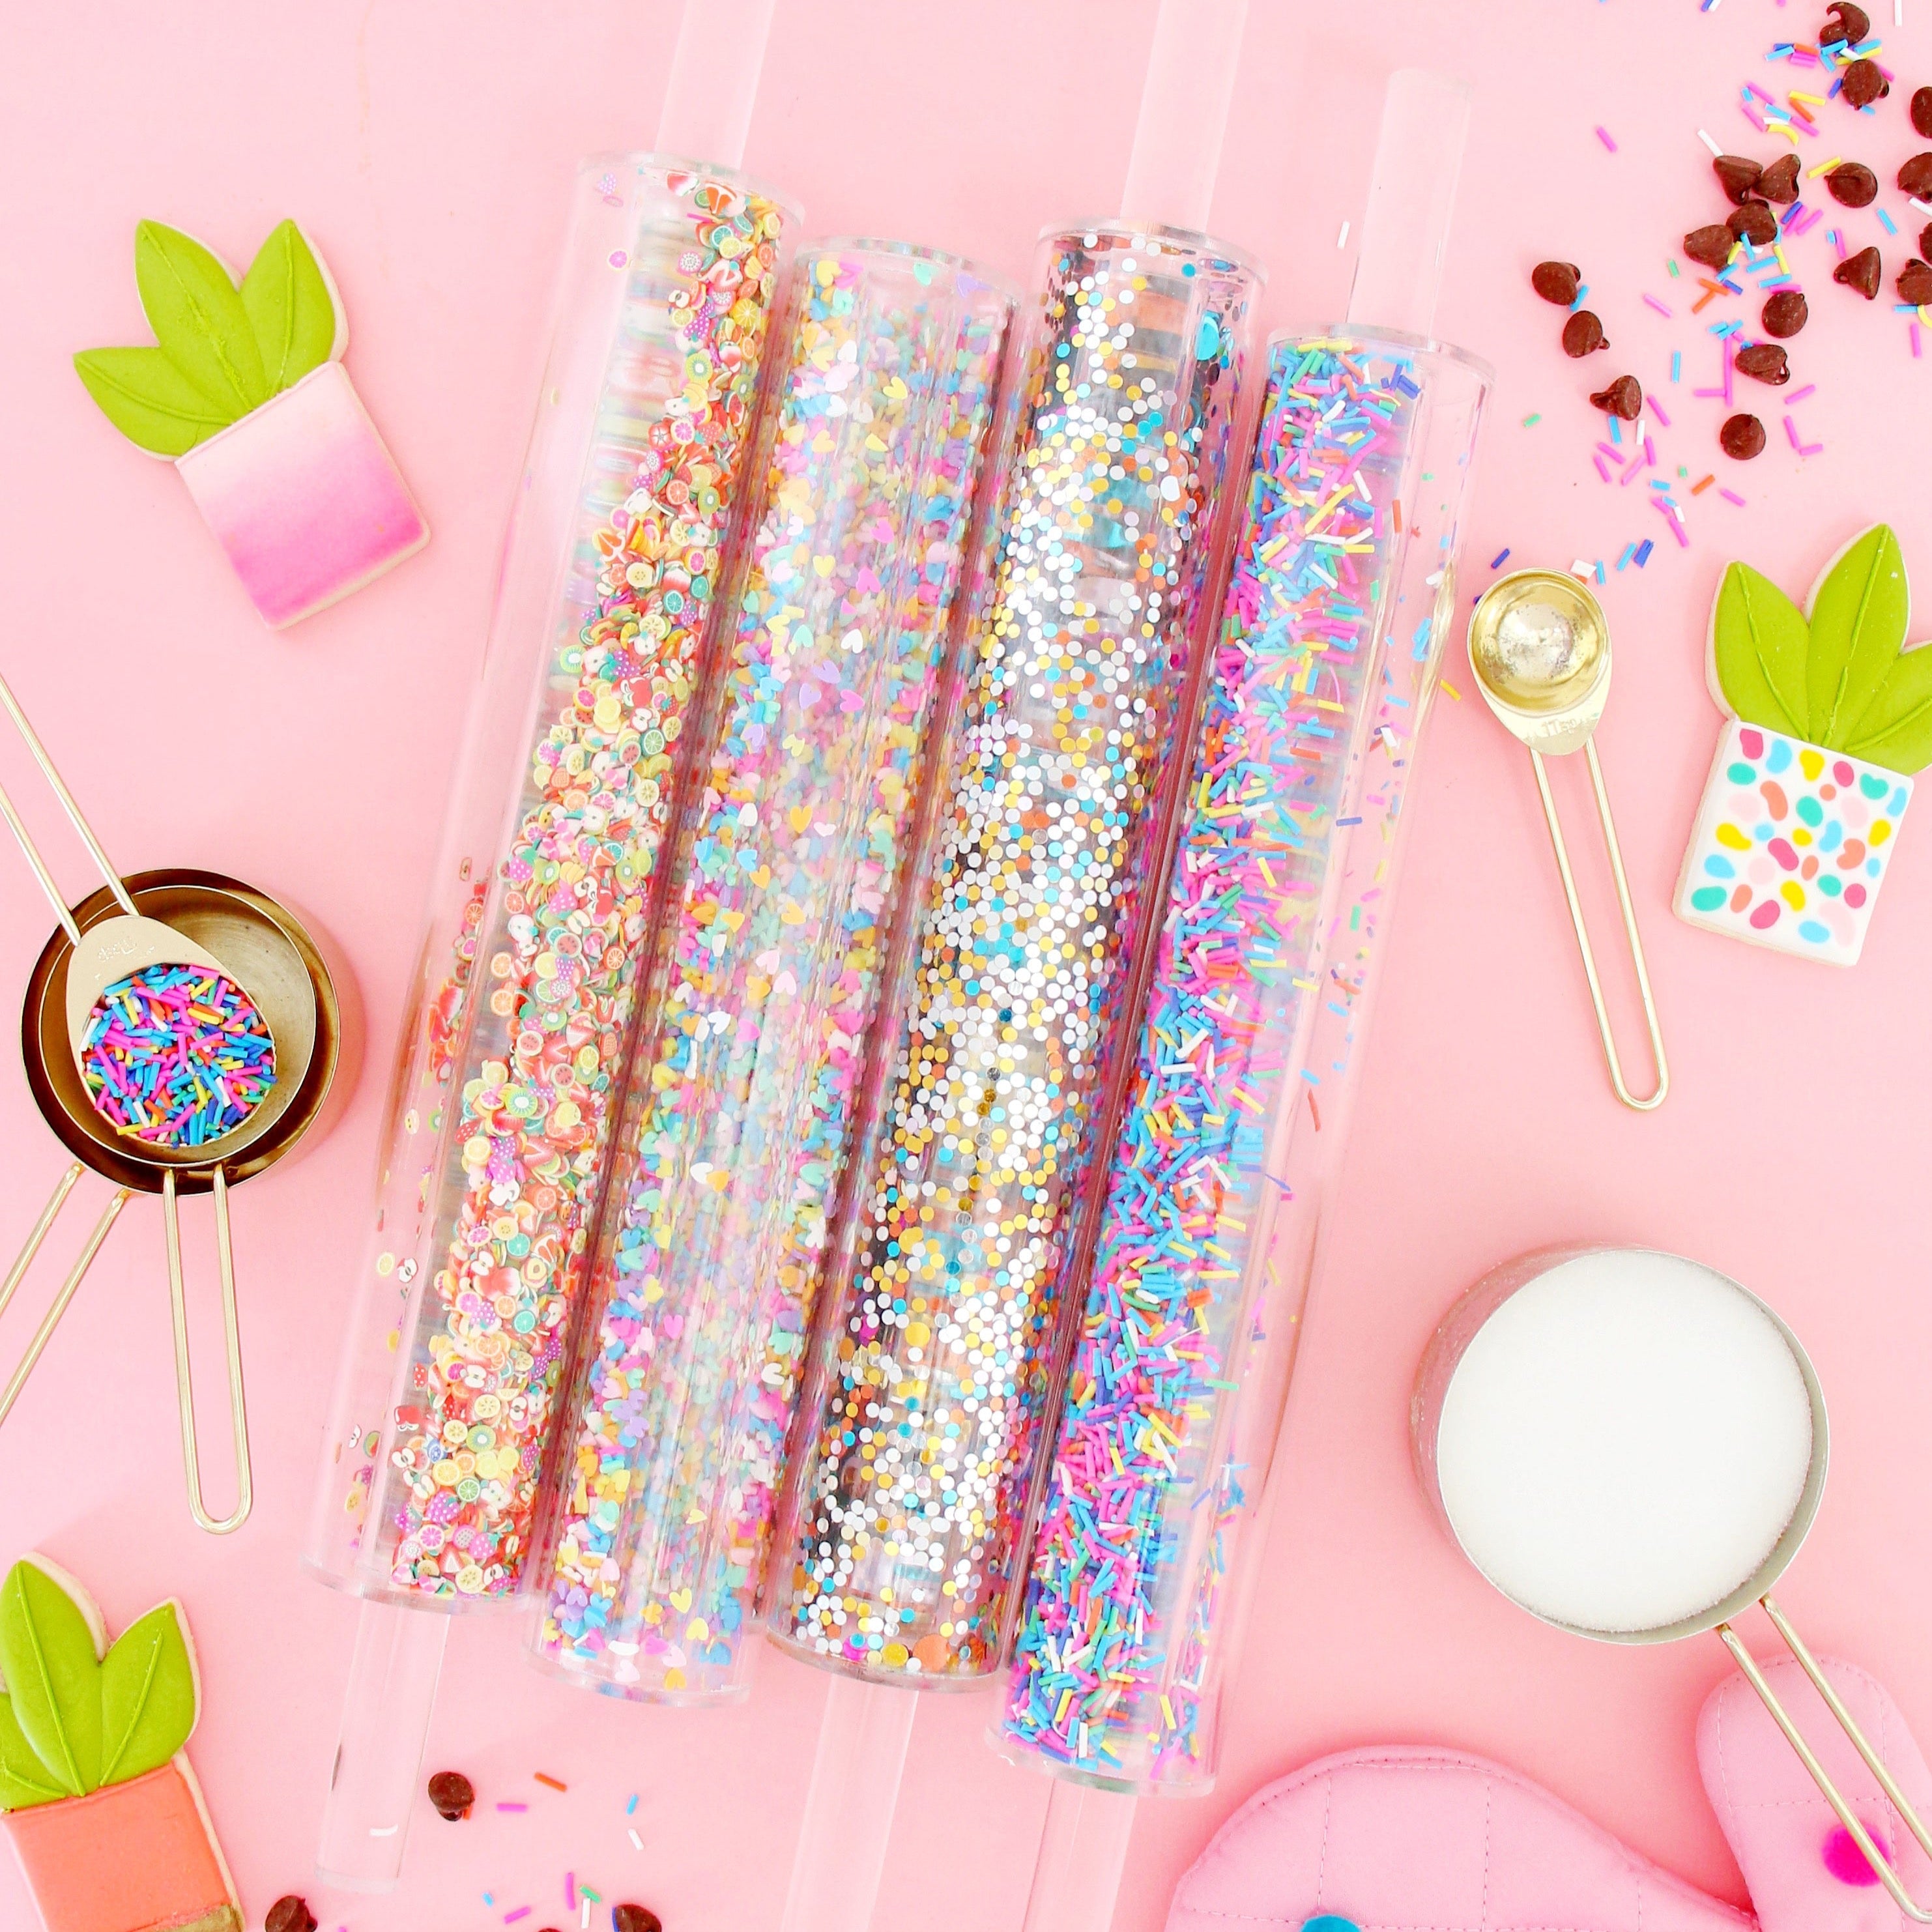 Acrylic confetti and sprinkle filled rolling pin by Kailo Chic